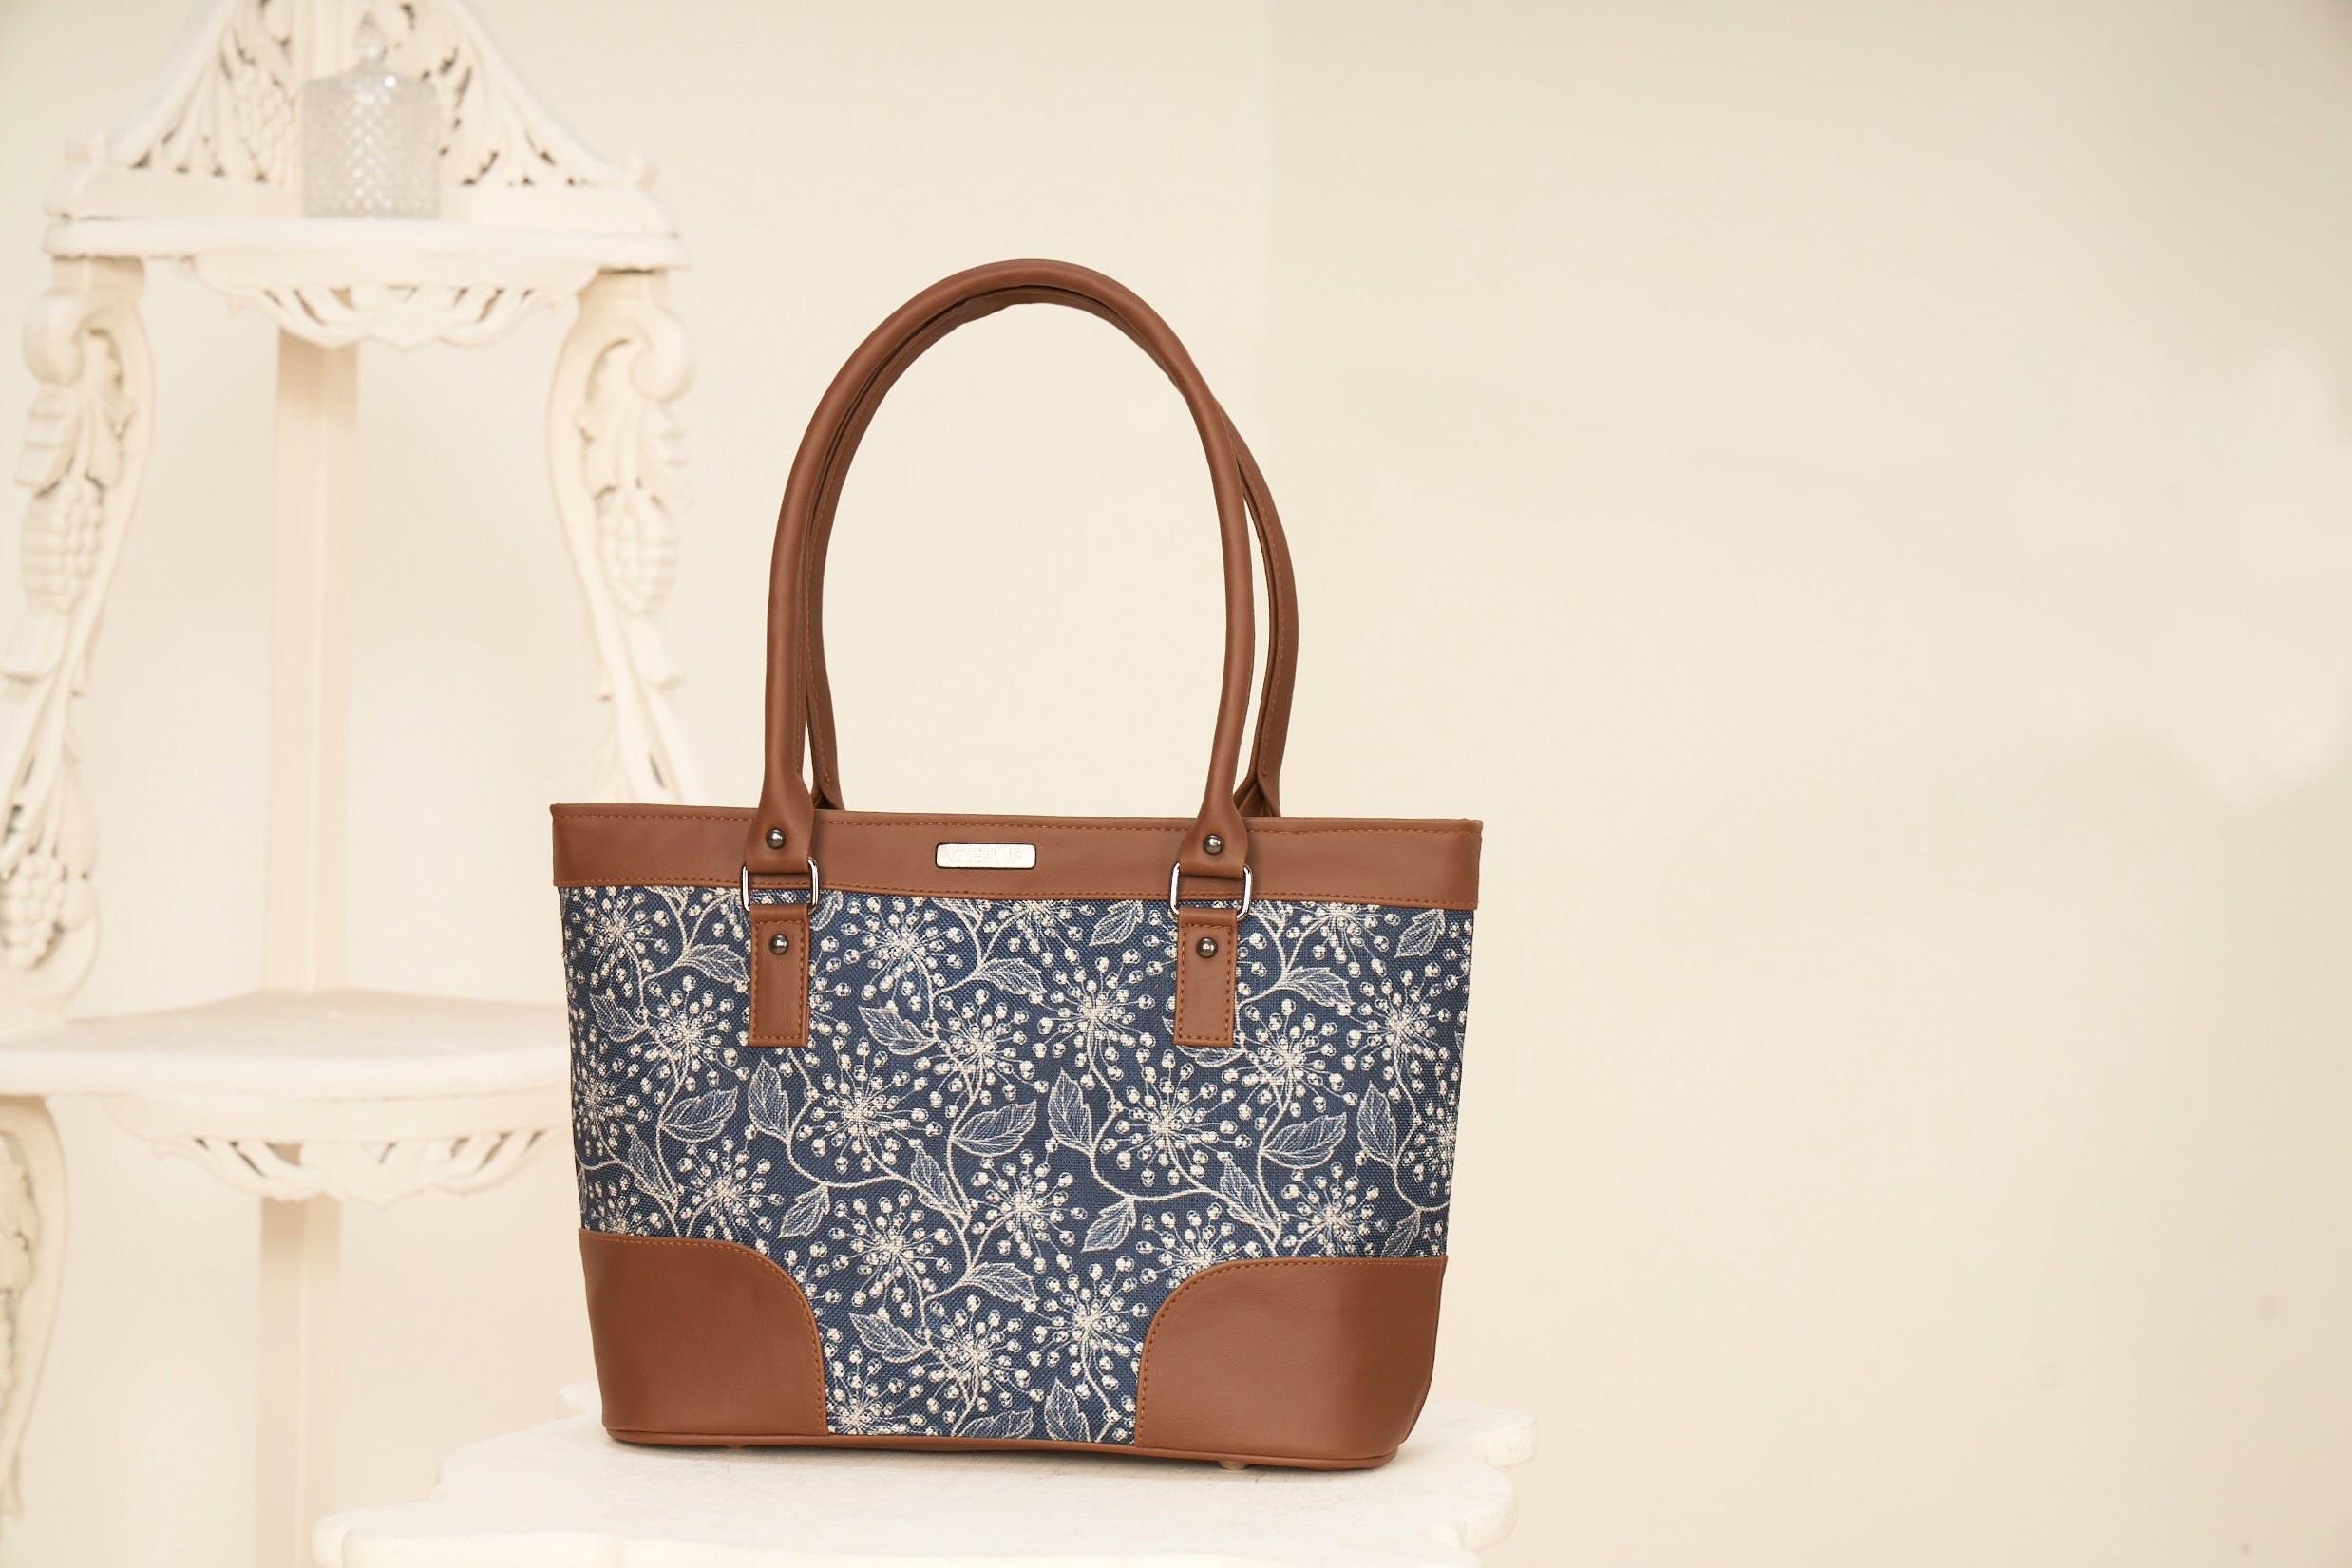 Fashionable Functionality: Aora 004 - Printed PolyCotton Canvas Tote for Modern Living